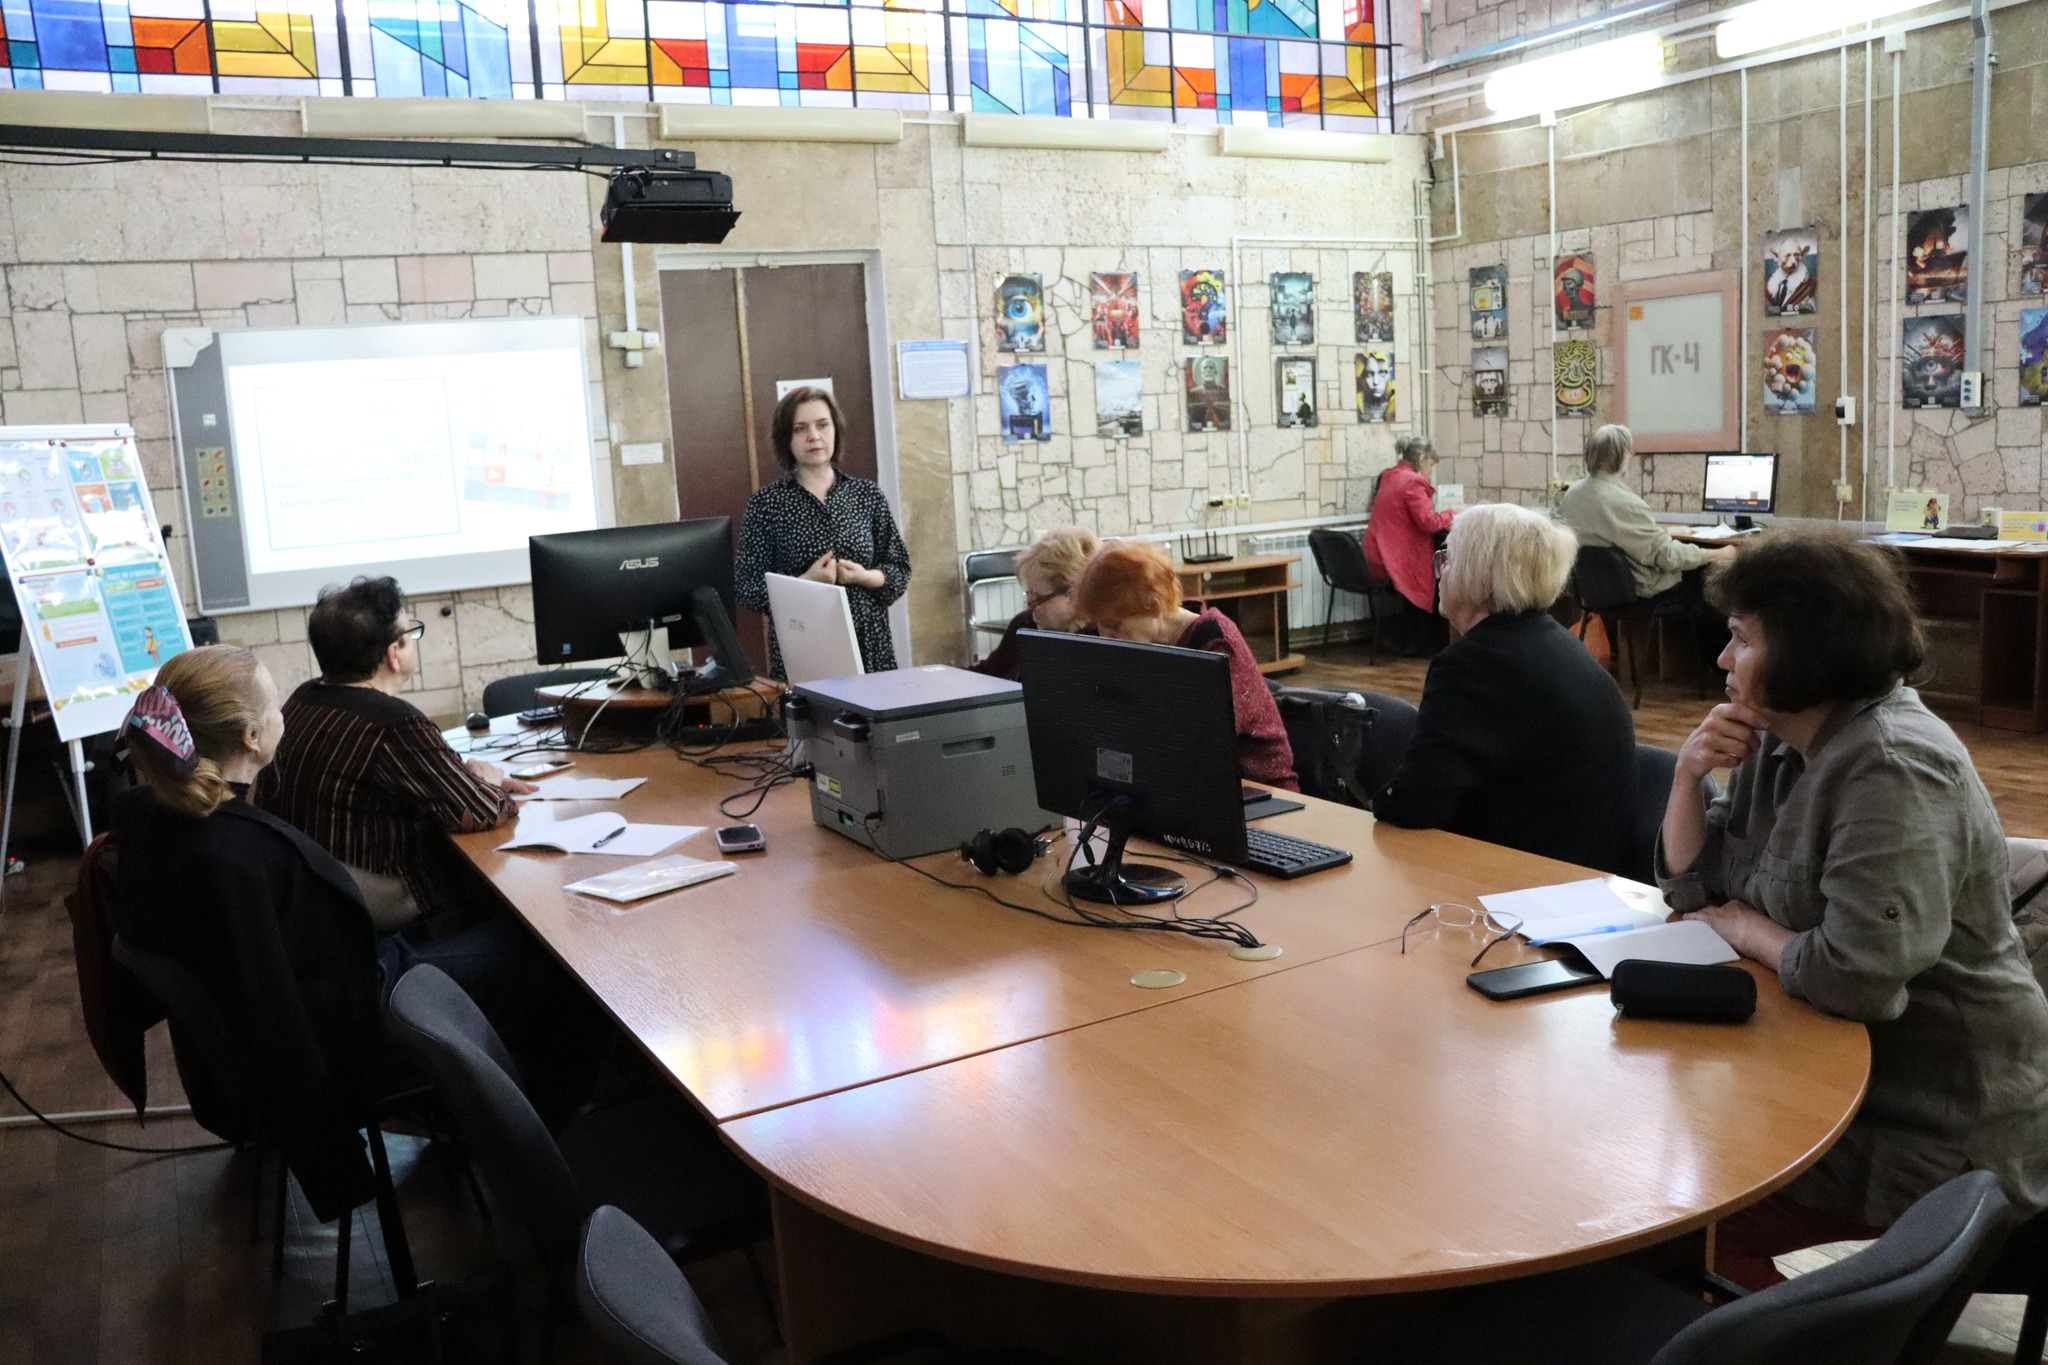 Specialists of the electronic information department of the Central сity library named after M.L. Kropyvnytskyi held a thematic mini-training for library visitors